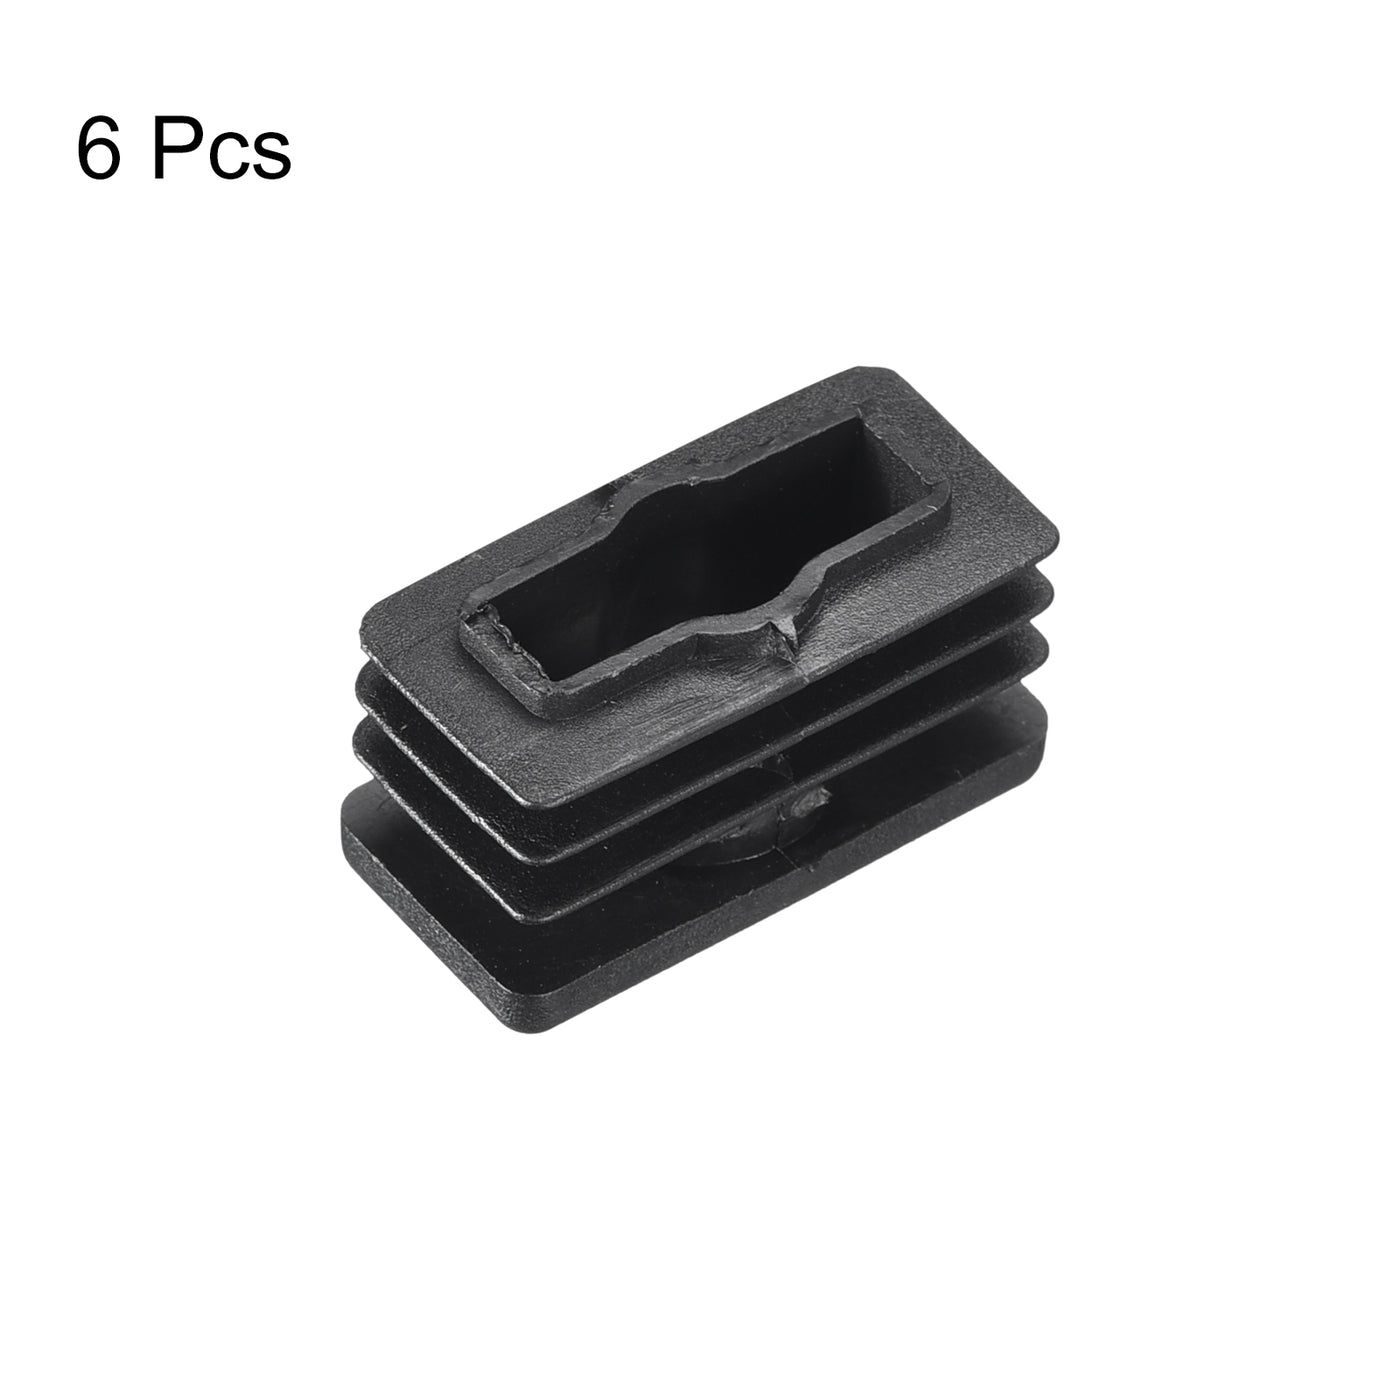 uxcell Uxcell 6Pcs 1.18"x0.59" Caster Insert with Thread, Square M6 Thread for Furniture